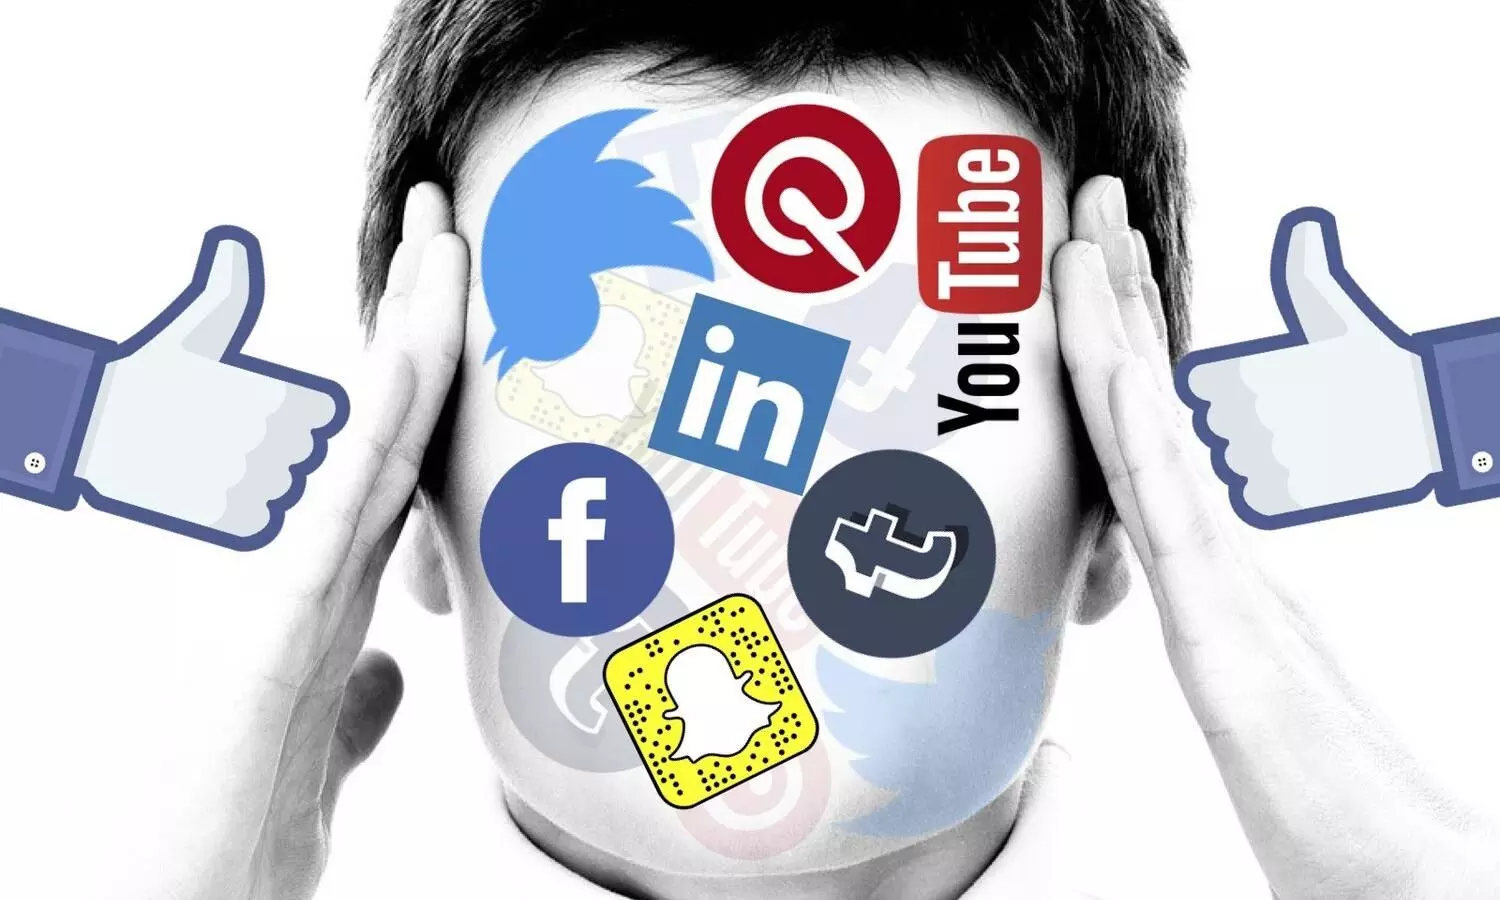 Increased use of social media leads to depression in adults within 6 month: Study